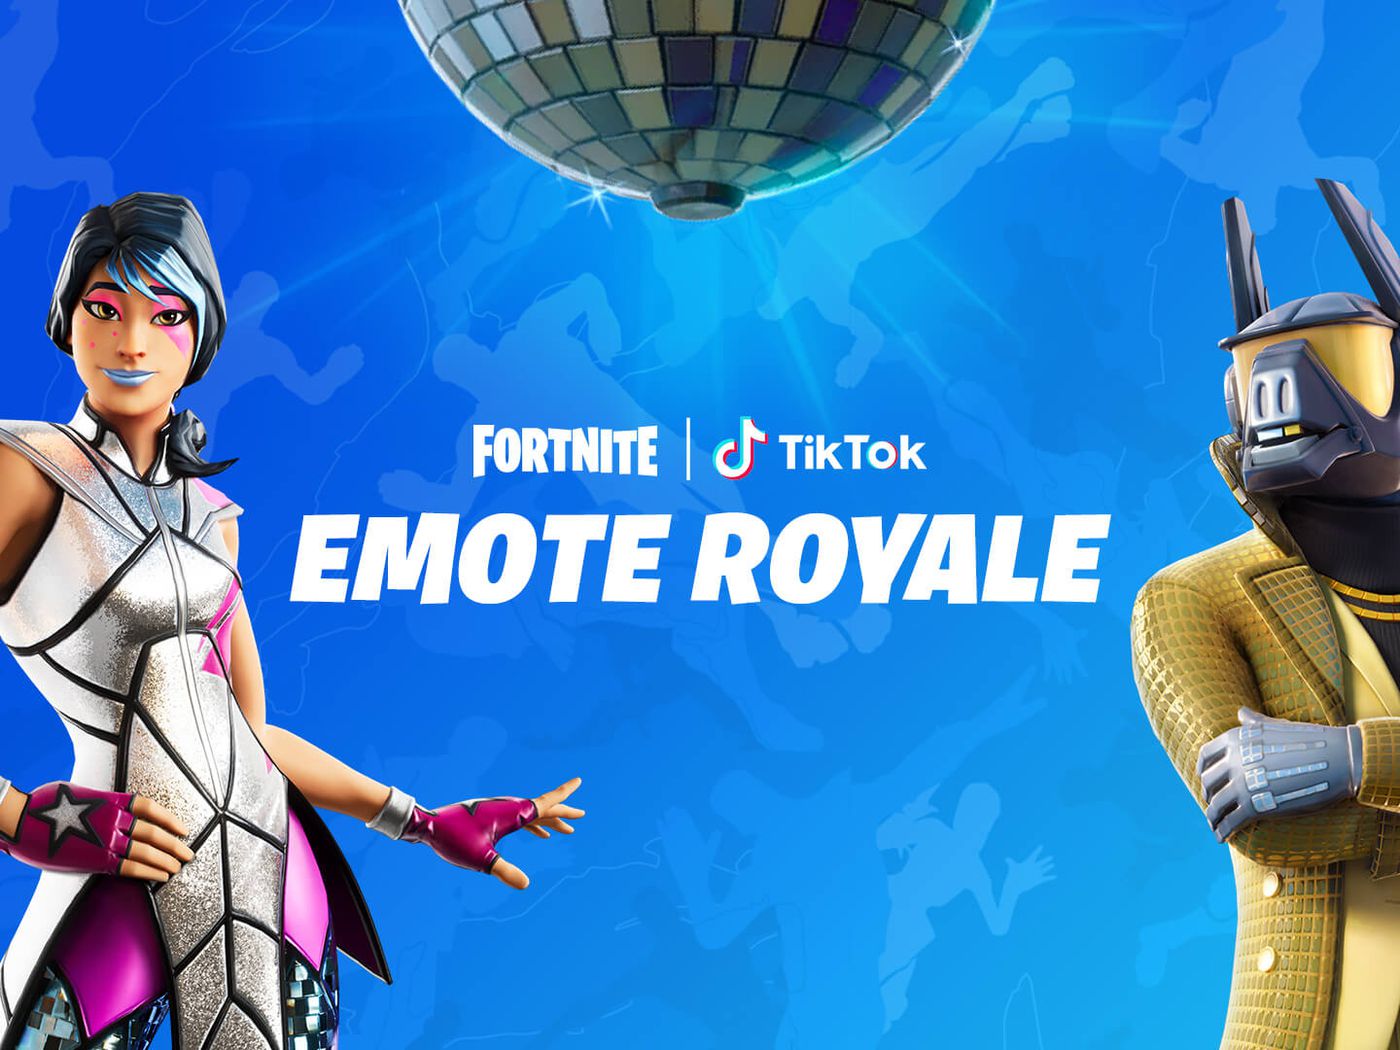 Fortnite Is Holding A Tiktok Dance Contest To Find The Next Great